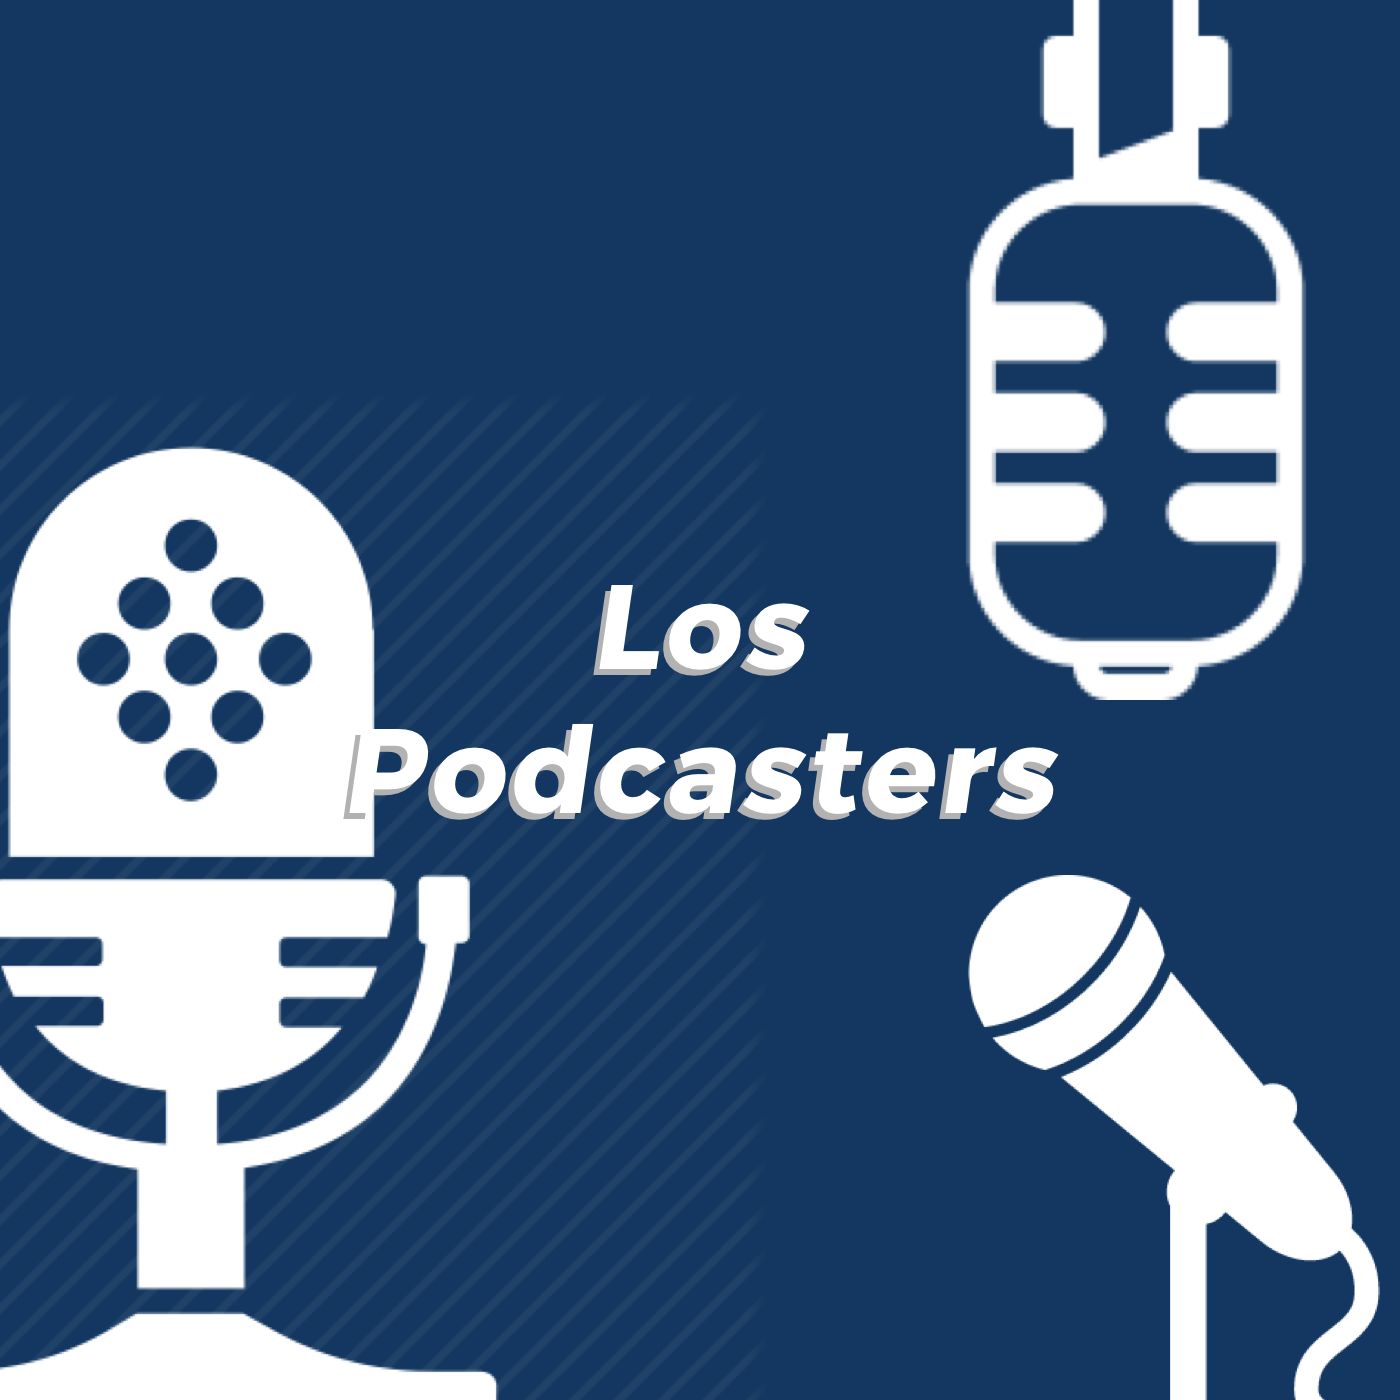 Los Podcasters